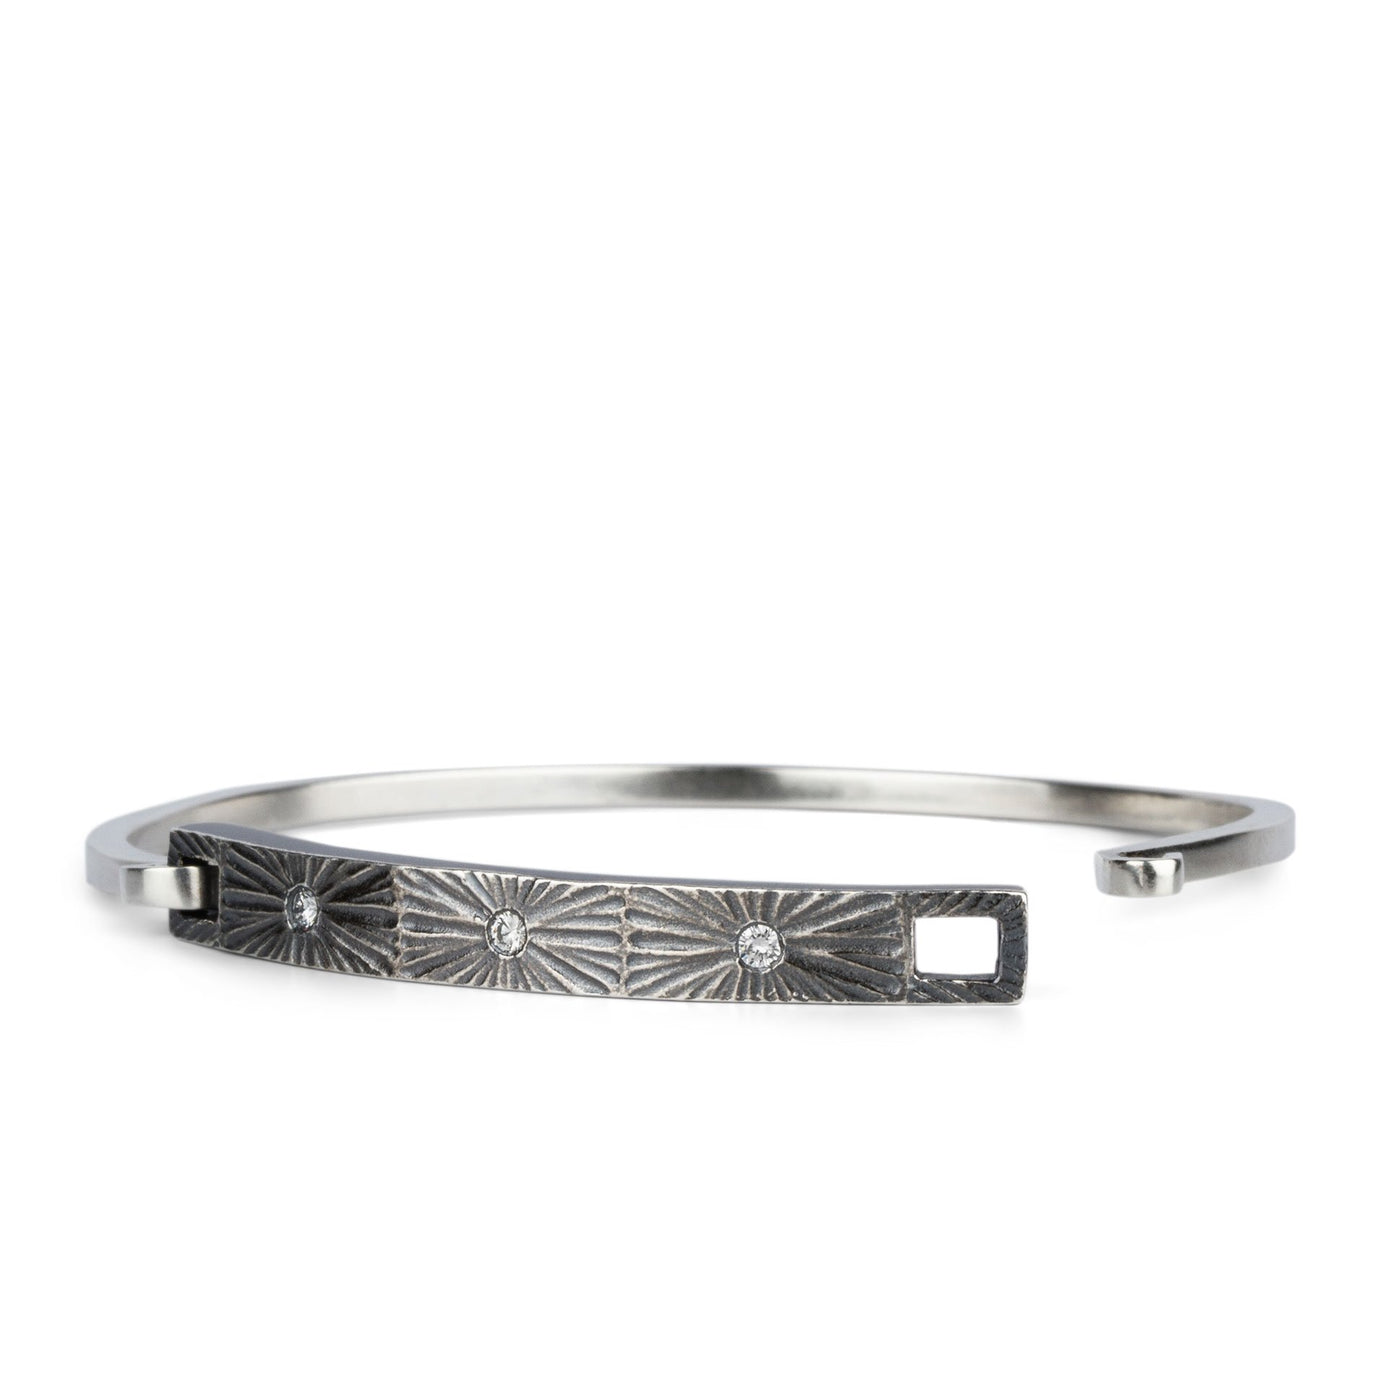 Oxidized sterling silver bar bracelet with three diamonds and a carved sunburst around each by Corey Egan on a white background side view #1